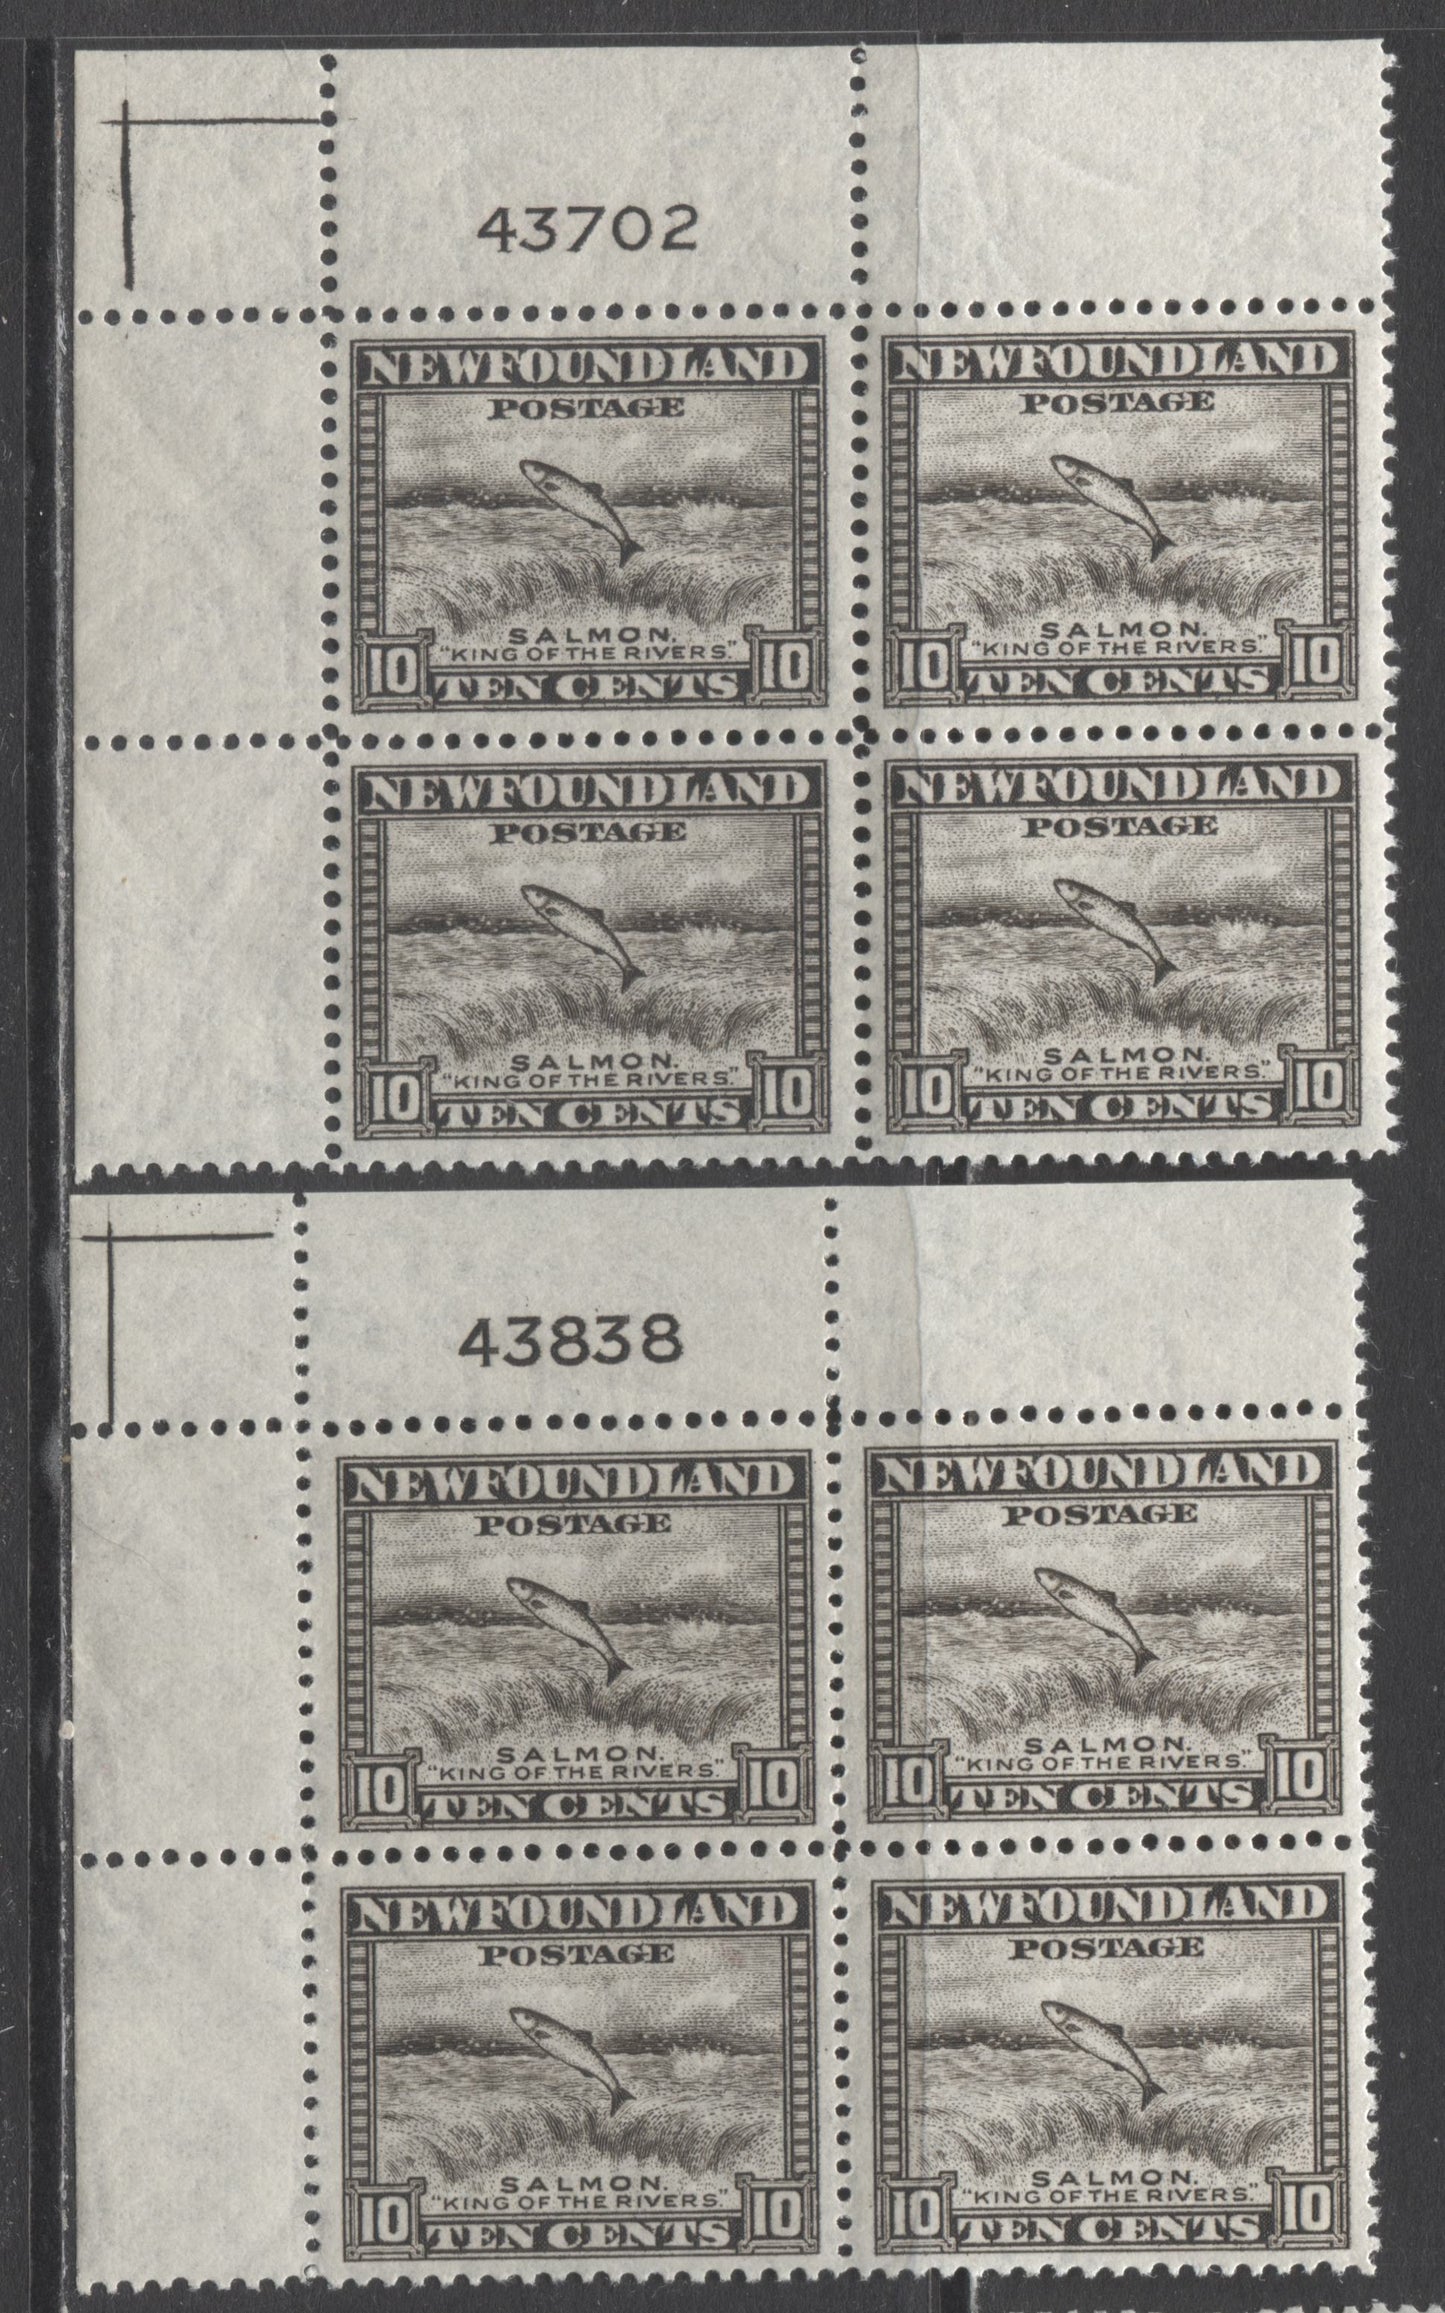 Lot 221 Newfoundland #260 10c Brownish Black Salmon Leaping Falls, 1941-1944 Resources Re-Issue, 2 VFNH UL Plate Blocks Of 4